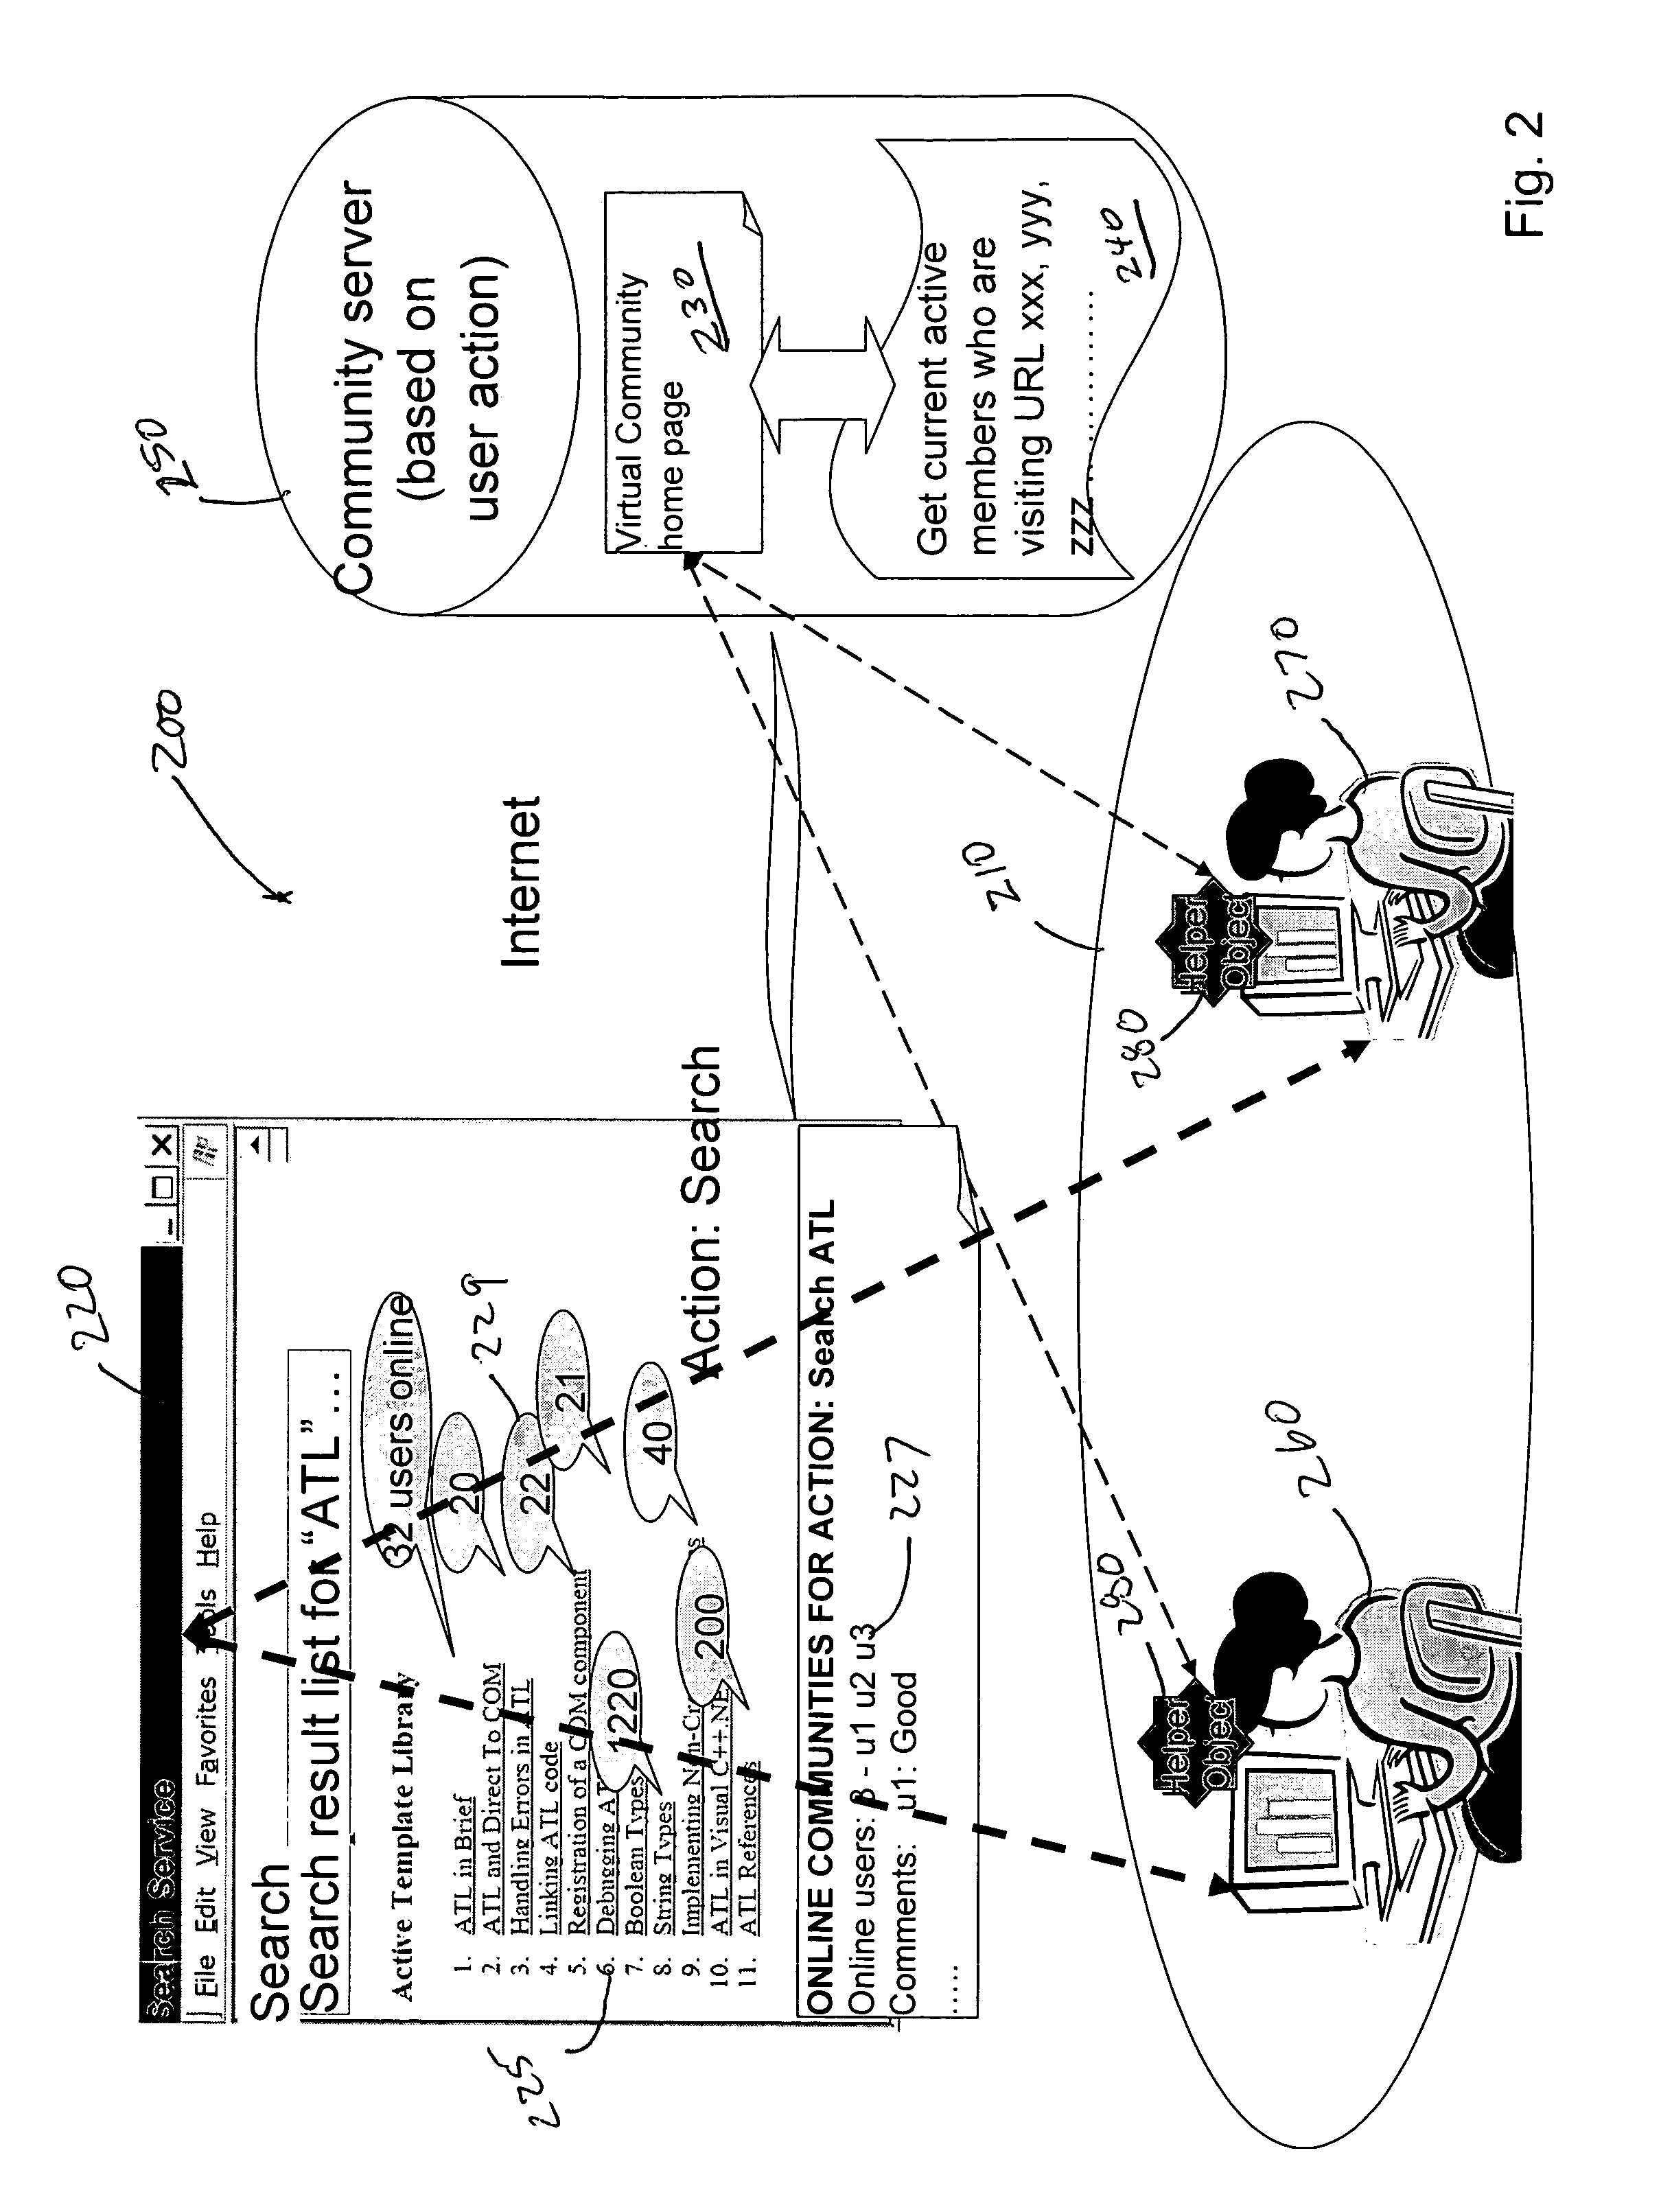 System and method of forming action based virtual communities and related search mechanisms